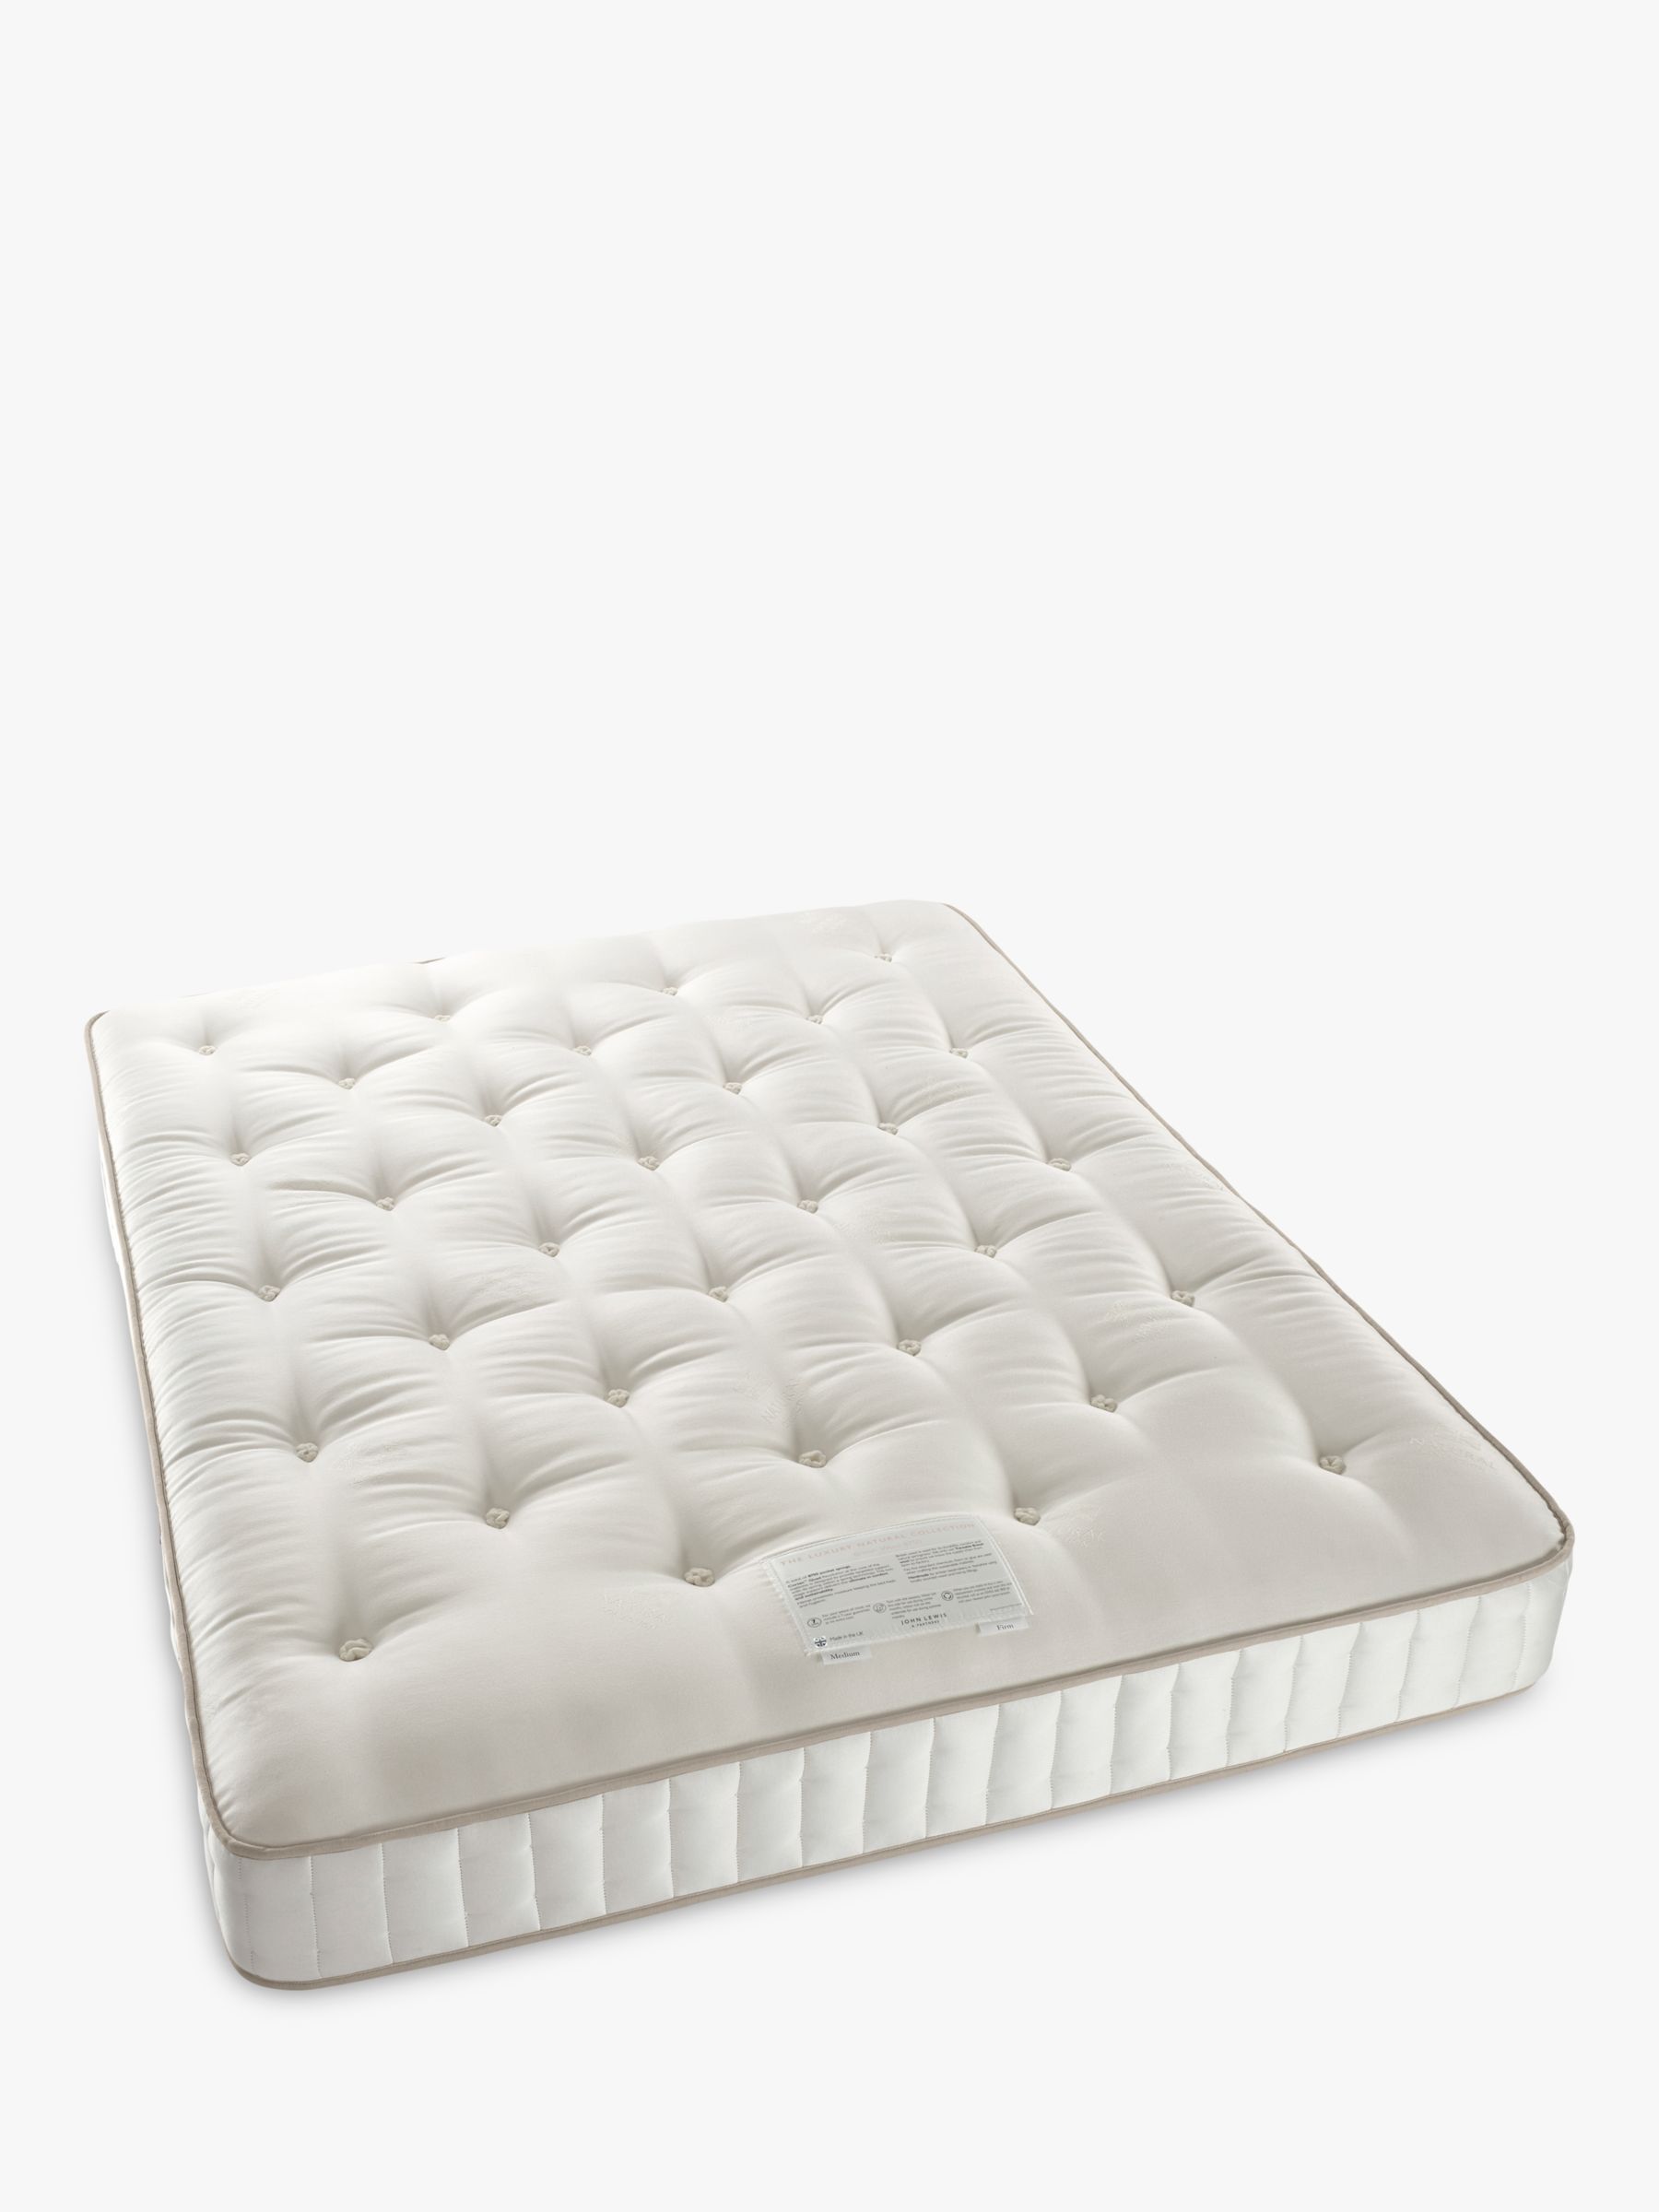 Photo of John lewis luxury natural collection british wool 8750 small double firm tension pocket spring mattress